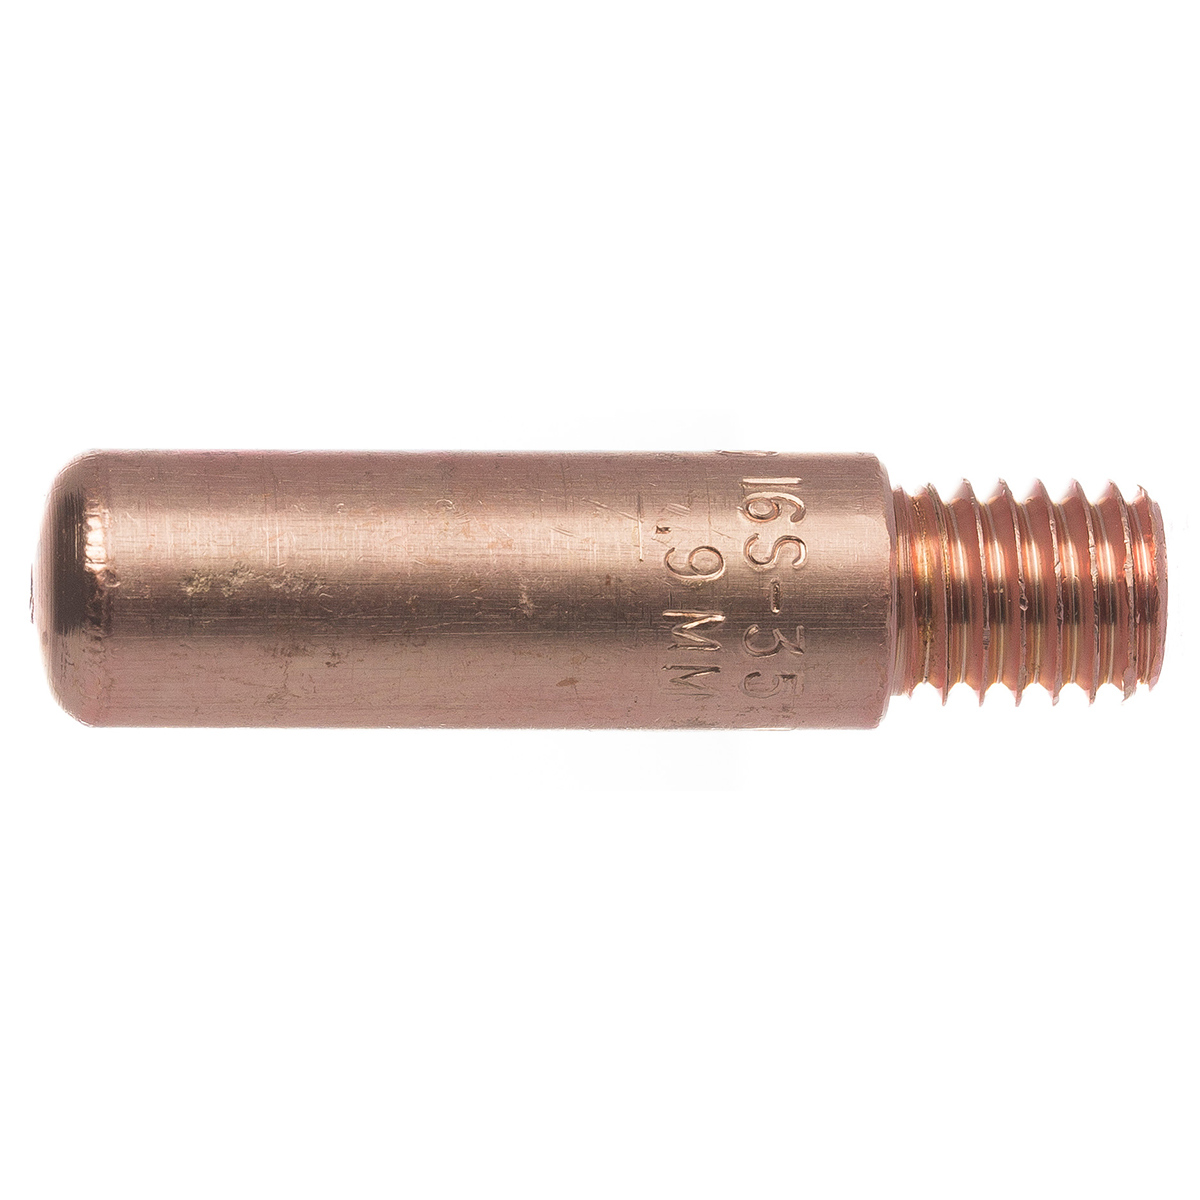 Tweco Series 14 11401170 Contact Tip PK25 0.052 in 